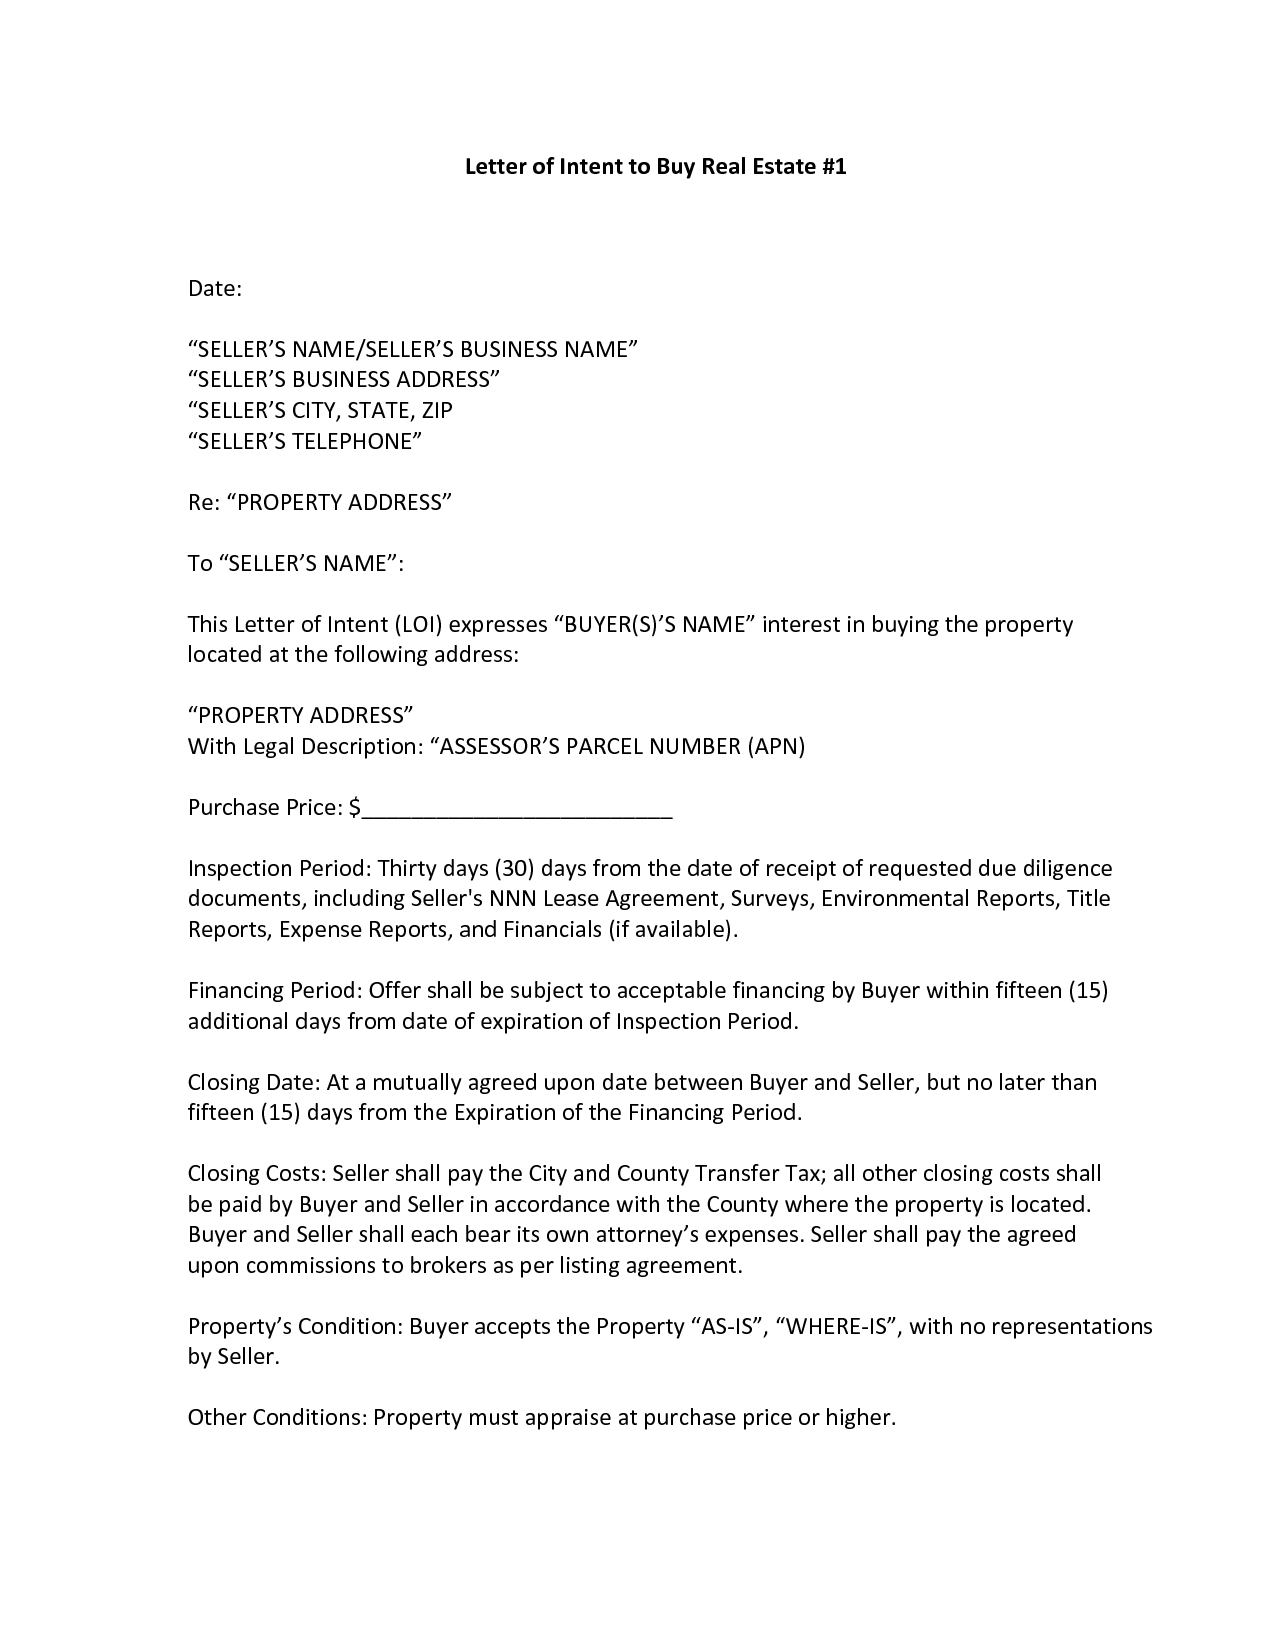 Letter Of Intent to Sell A Business Template - Sample Letter Intent Purchase Real Estate New Property Fer